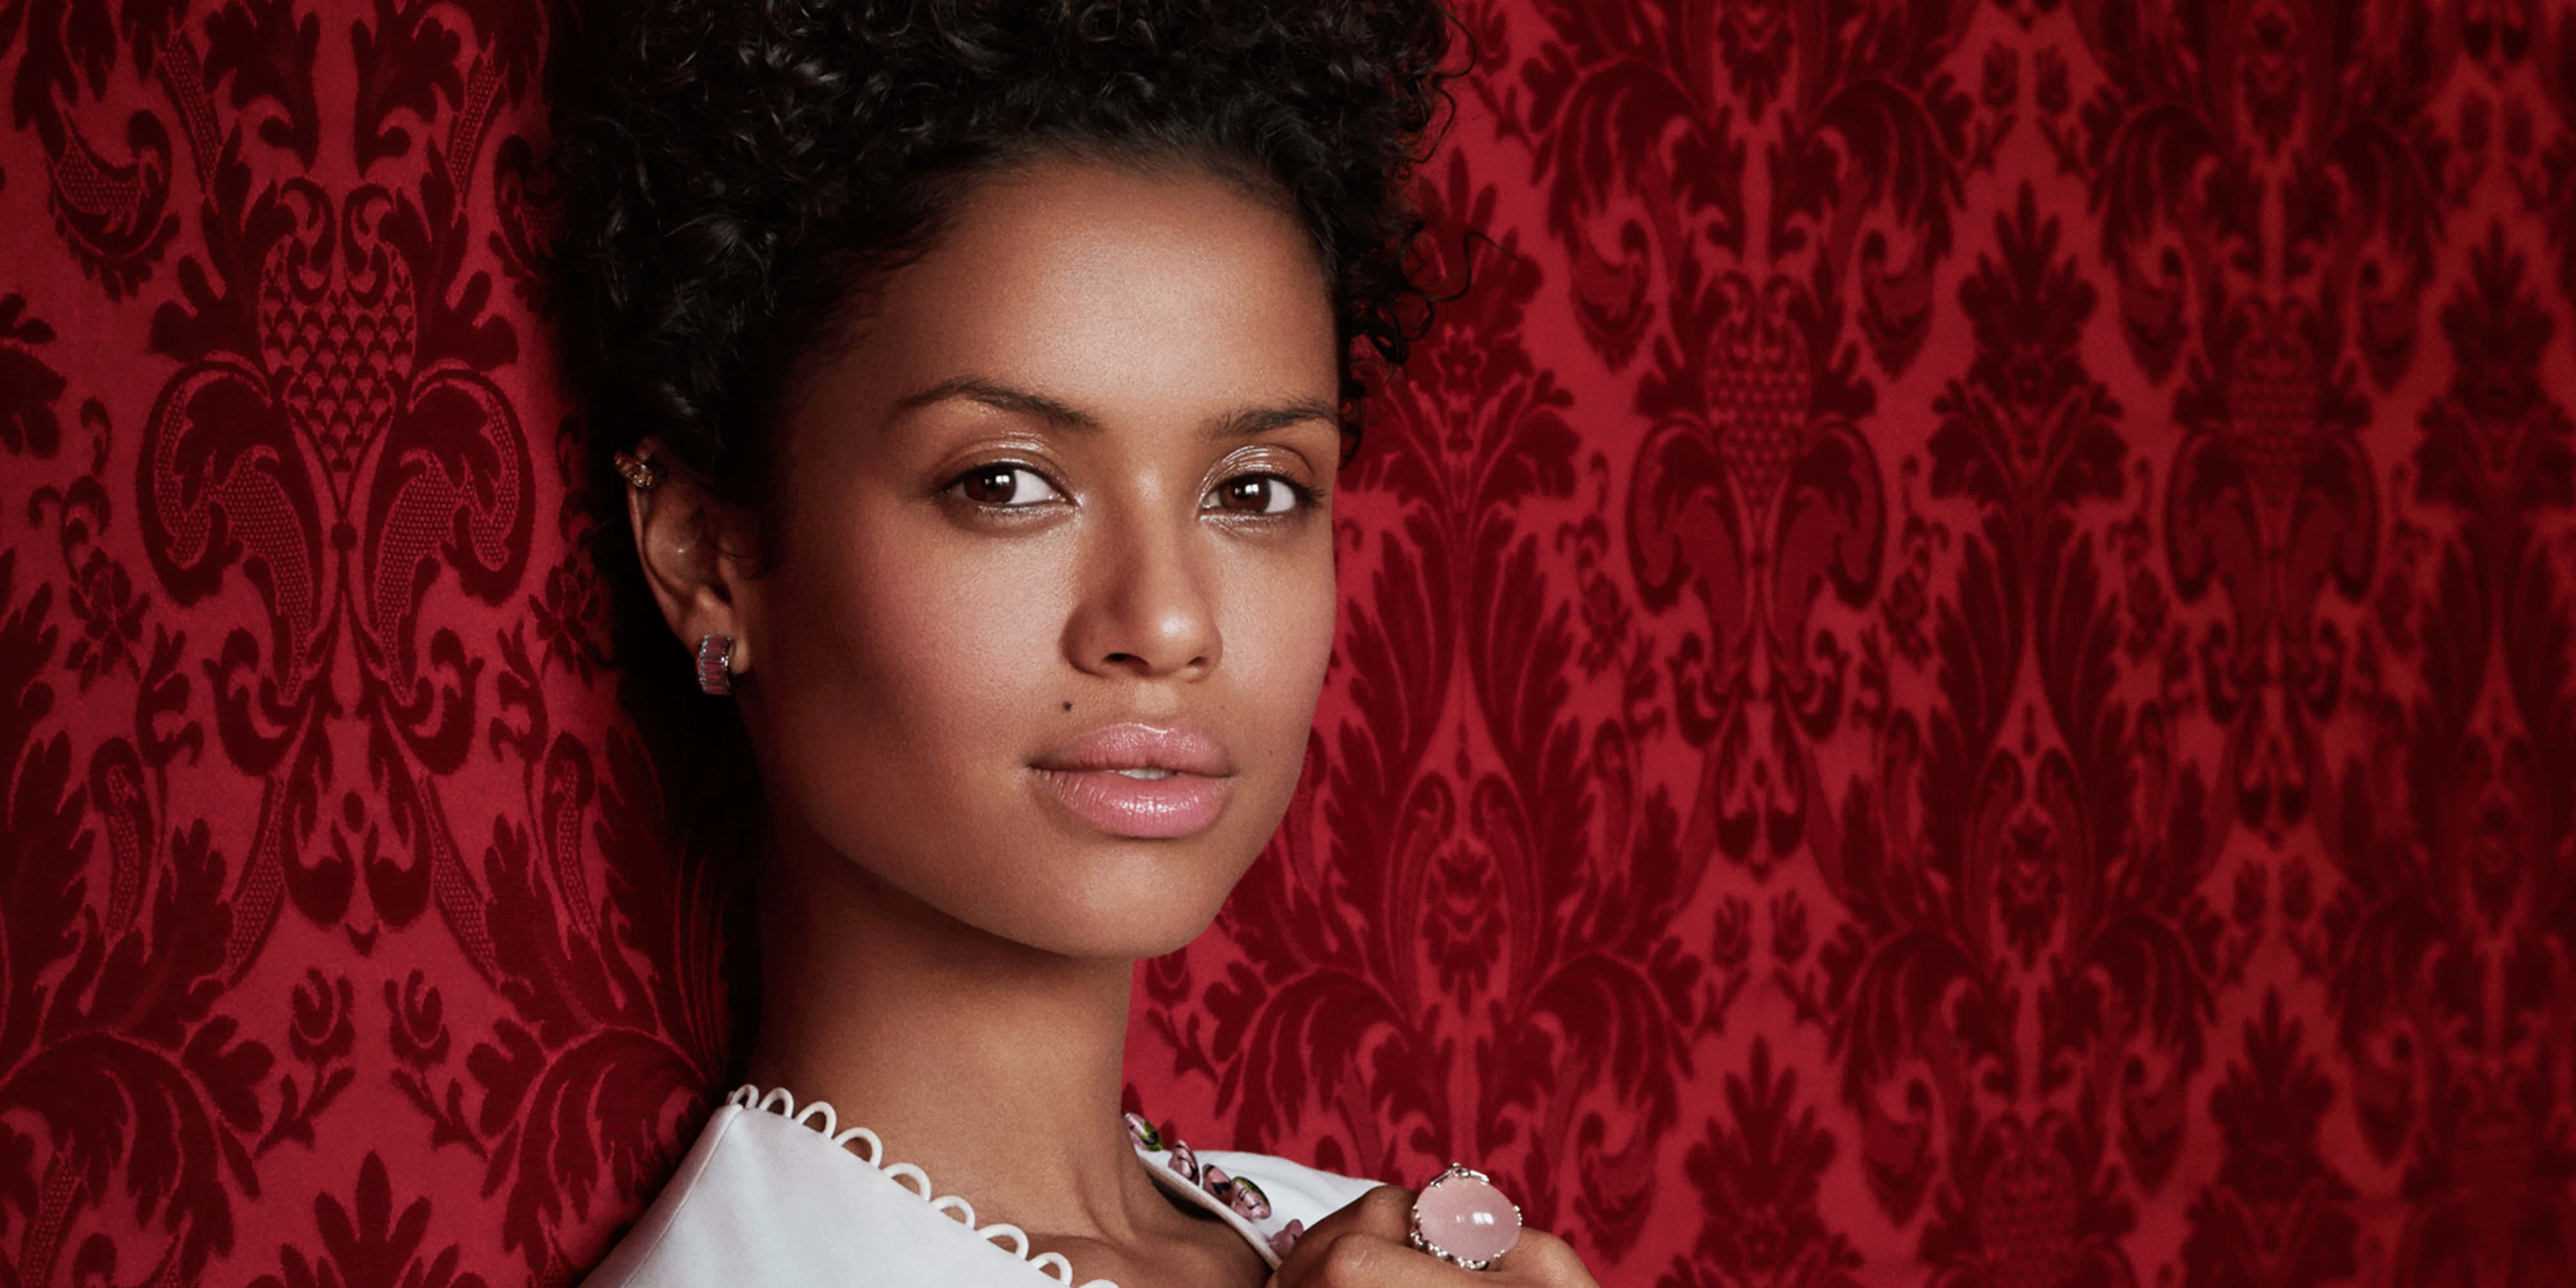 Download Gugu Mbatha Raw Striking A Pose In A Stunning Photoshoot Wallpaper Wallpapers Com